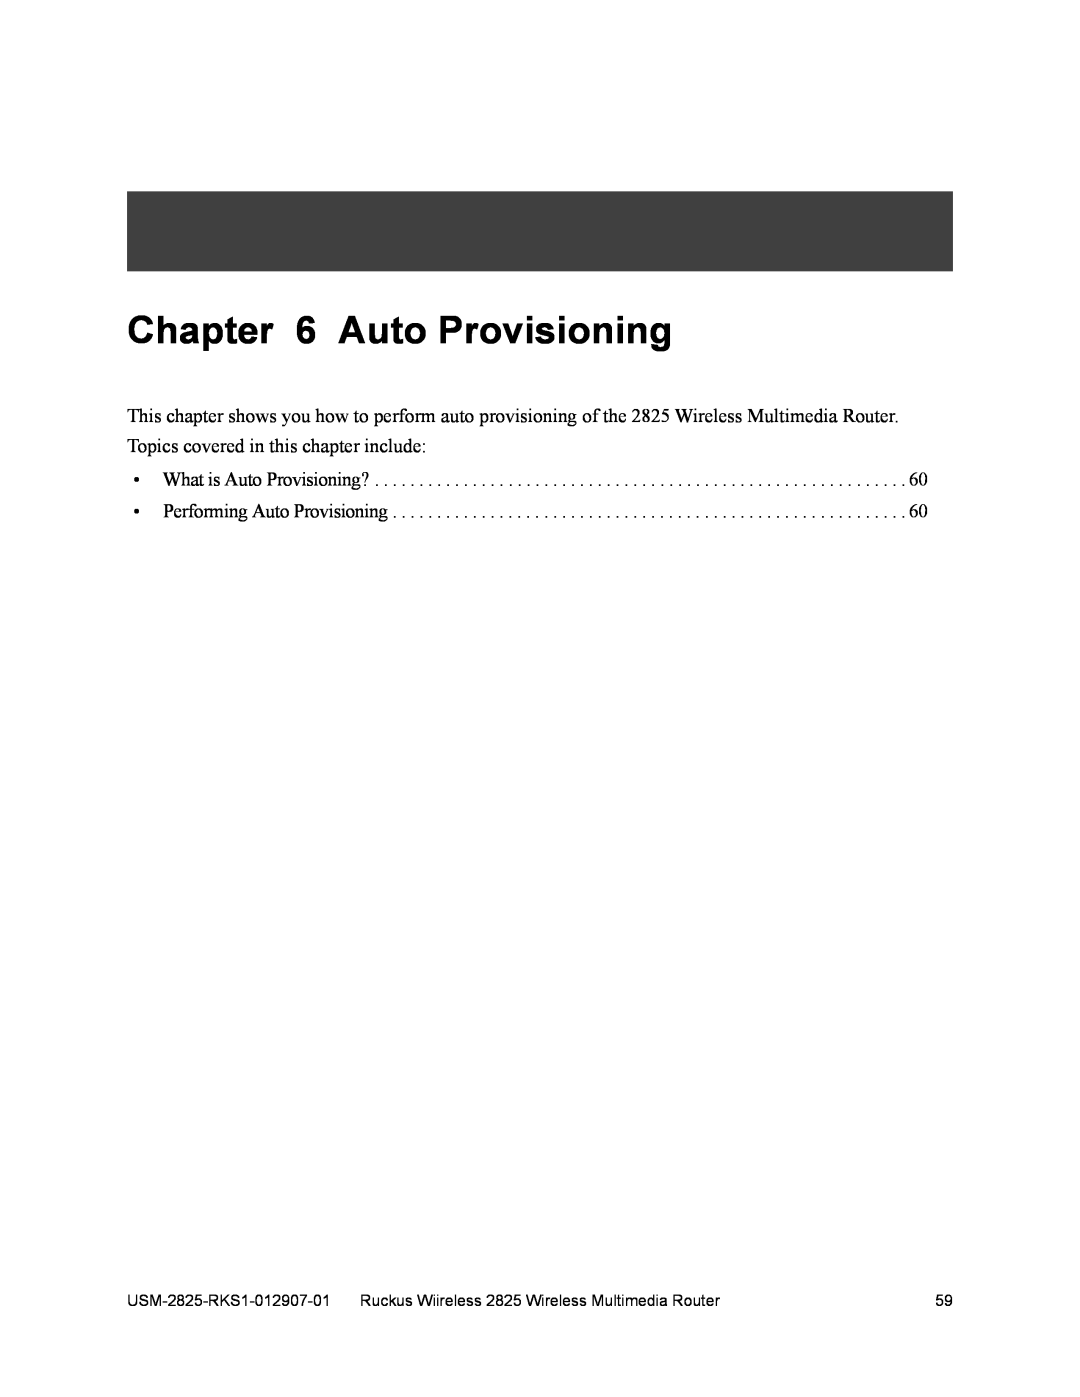 Ruckus Wireless 2111, 2825 manual What is Auto Provisioning? Performing Auto Provisioning 